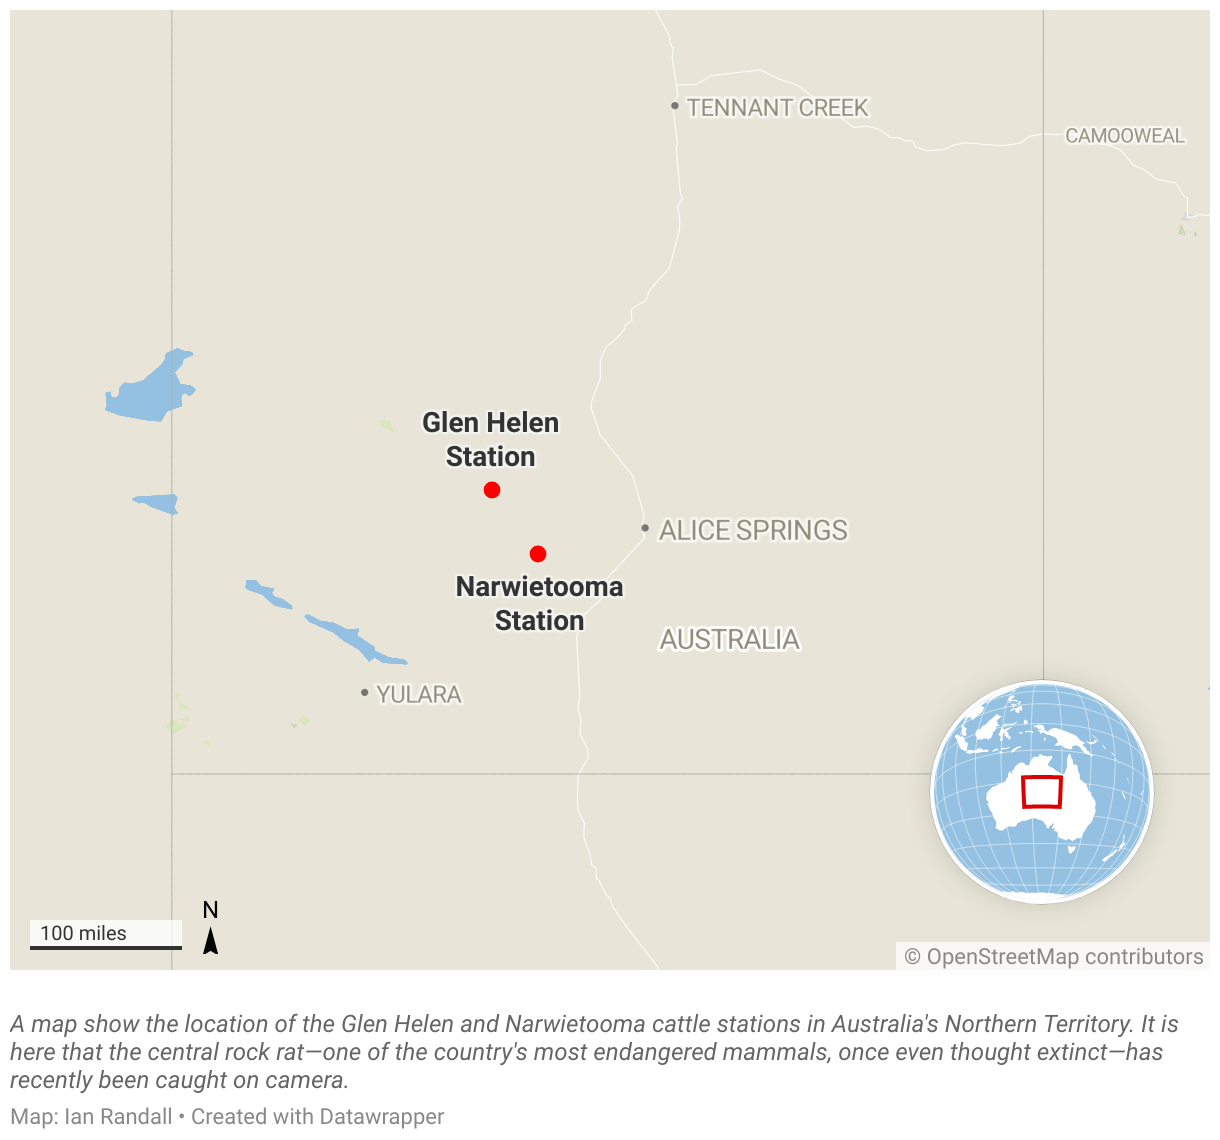 A map show the location of the Glen Helen and Narwietoomacattle stations in Australia's Northern Territory.